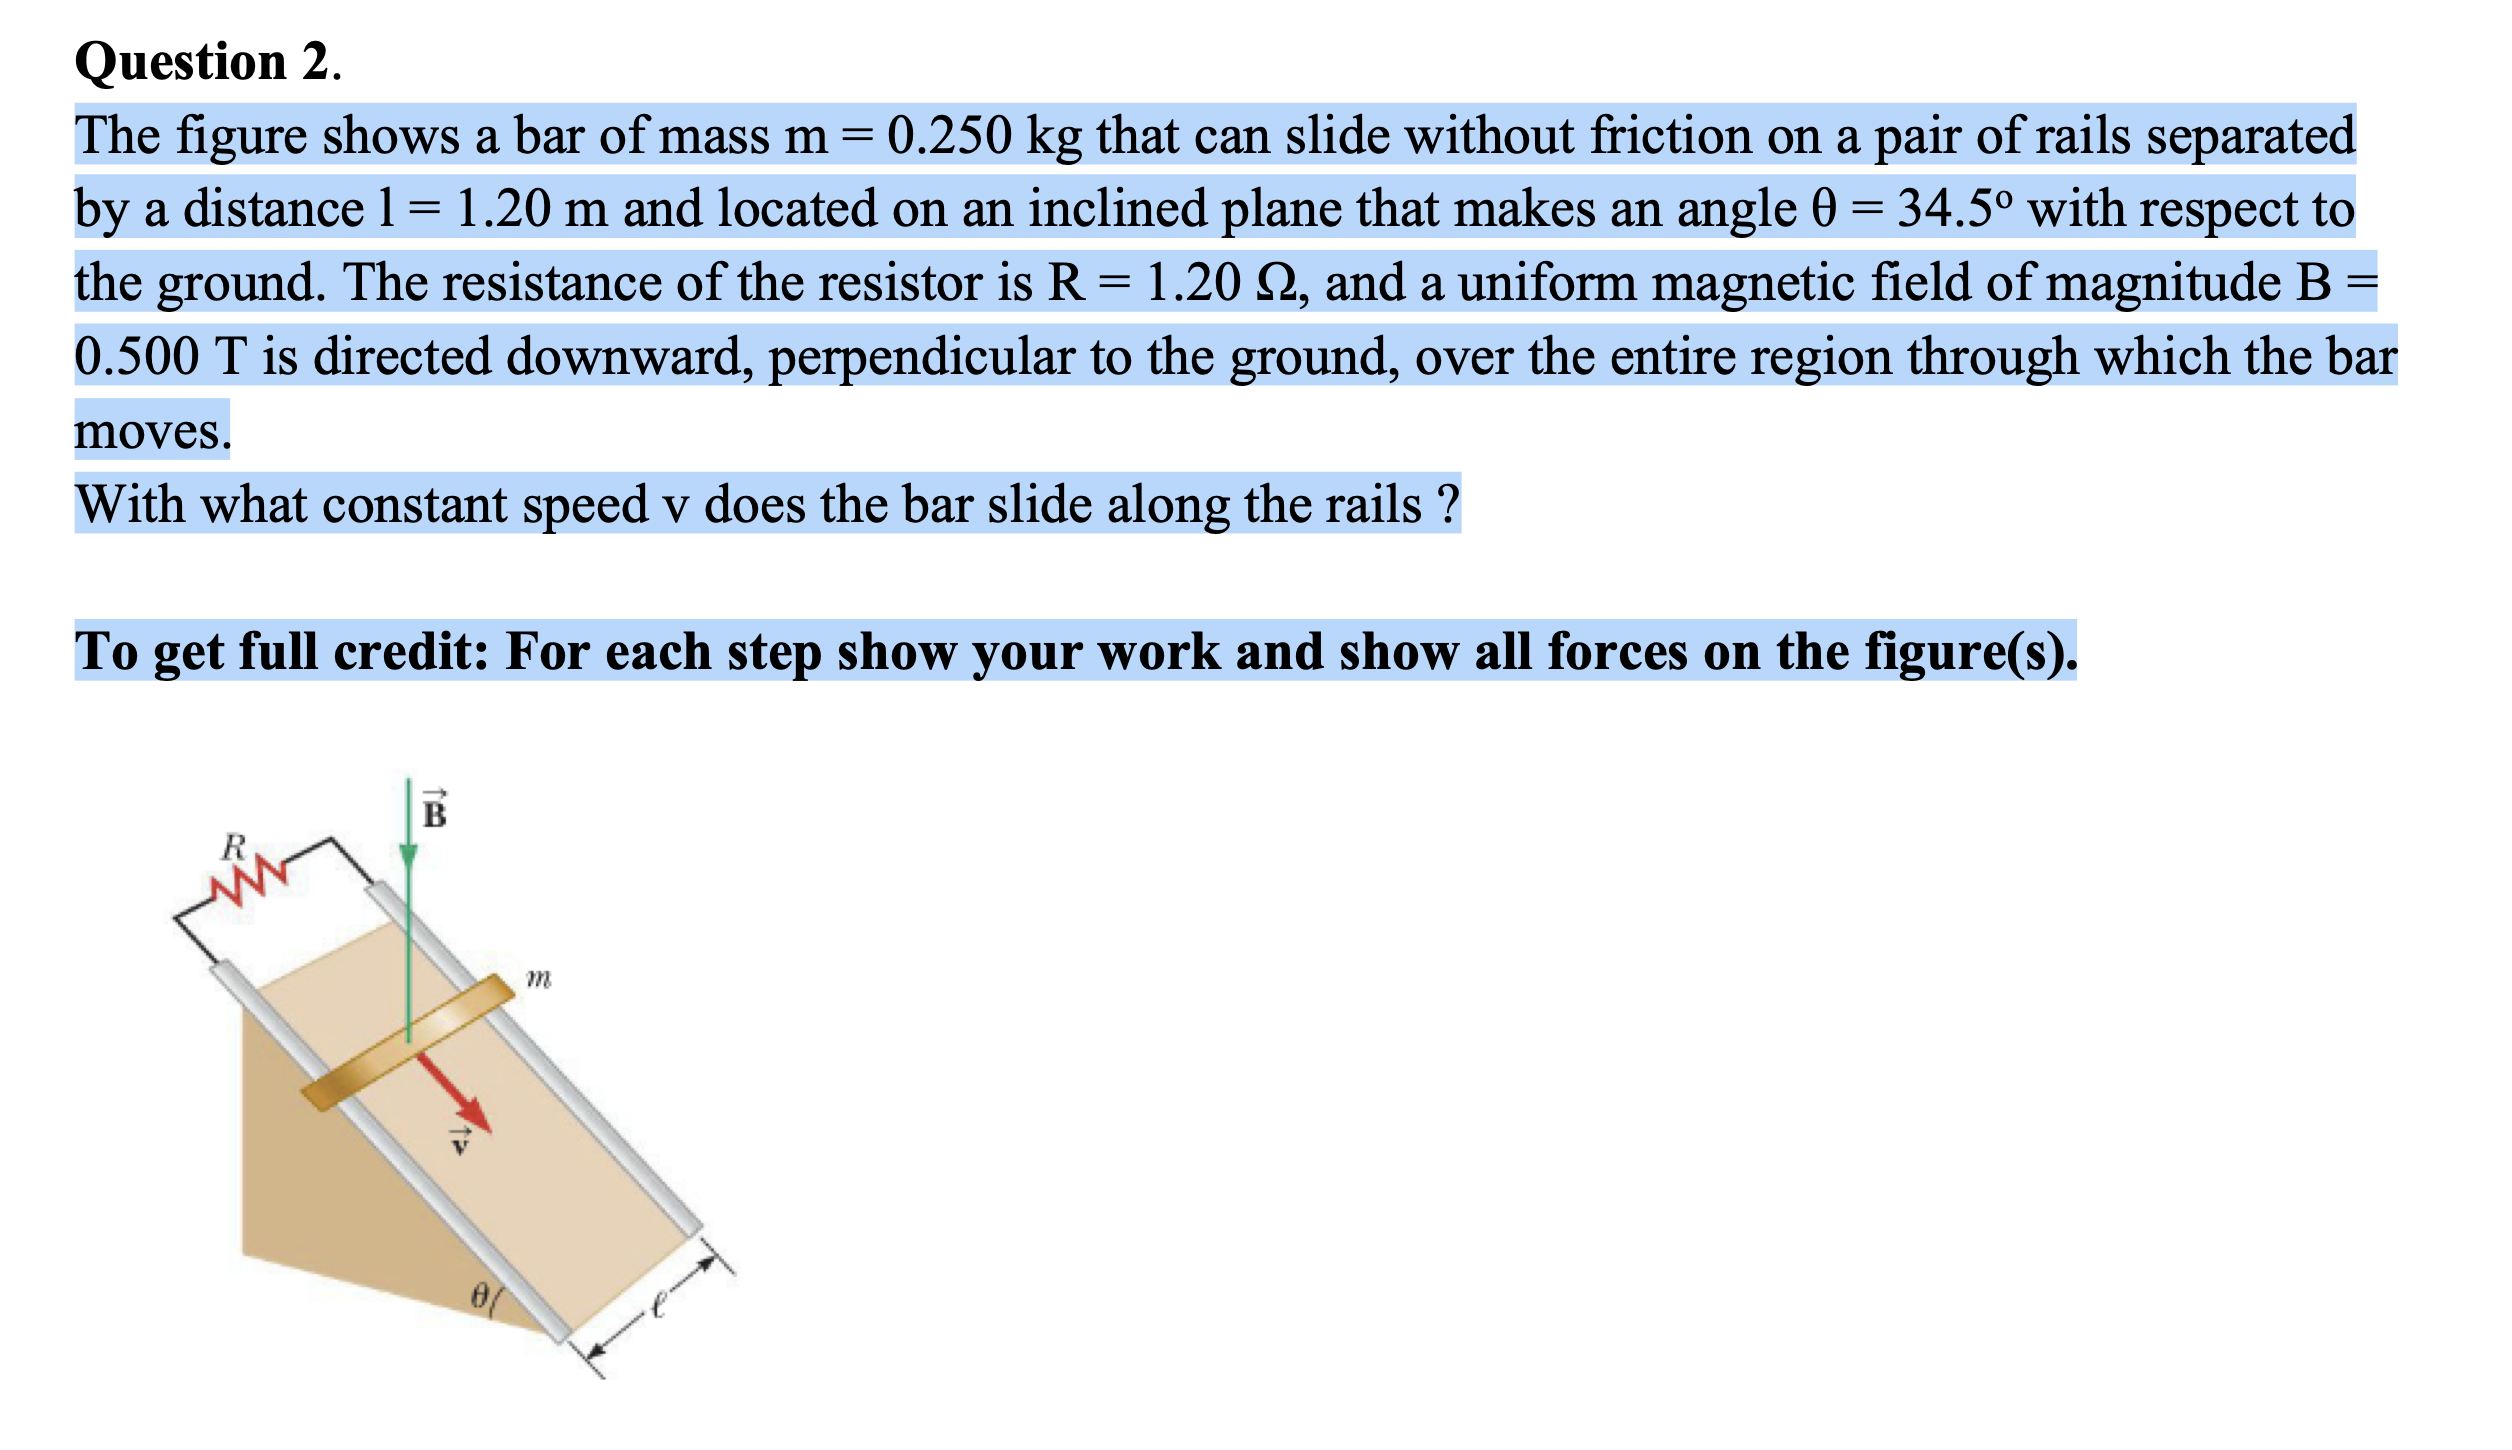 The figure shows a bar of mass m = 0.250 kg that can slide without friction on a pair of rails separated
by a distance 1= 1.20 m and located on an inclined plane that makes an angle 0 = 34.5° with respect to
the ground. The resistance of the resistor is R = 1.20 Q, and a uniform magnetic field of magnitude B =
0.500 T is directed downward, perpendicular to the ground, over the entire region through which the bar
moves.
With what constant speed v does the bar slide along the rails ?
